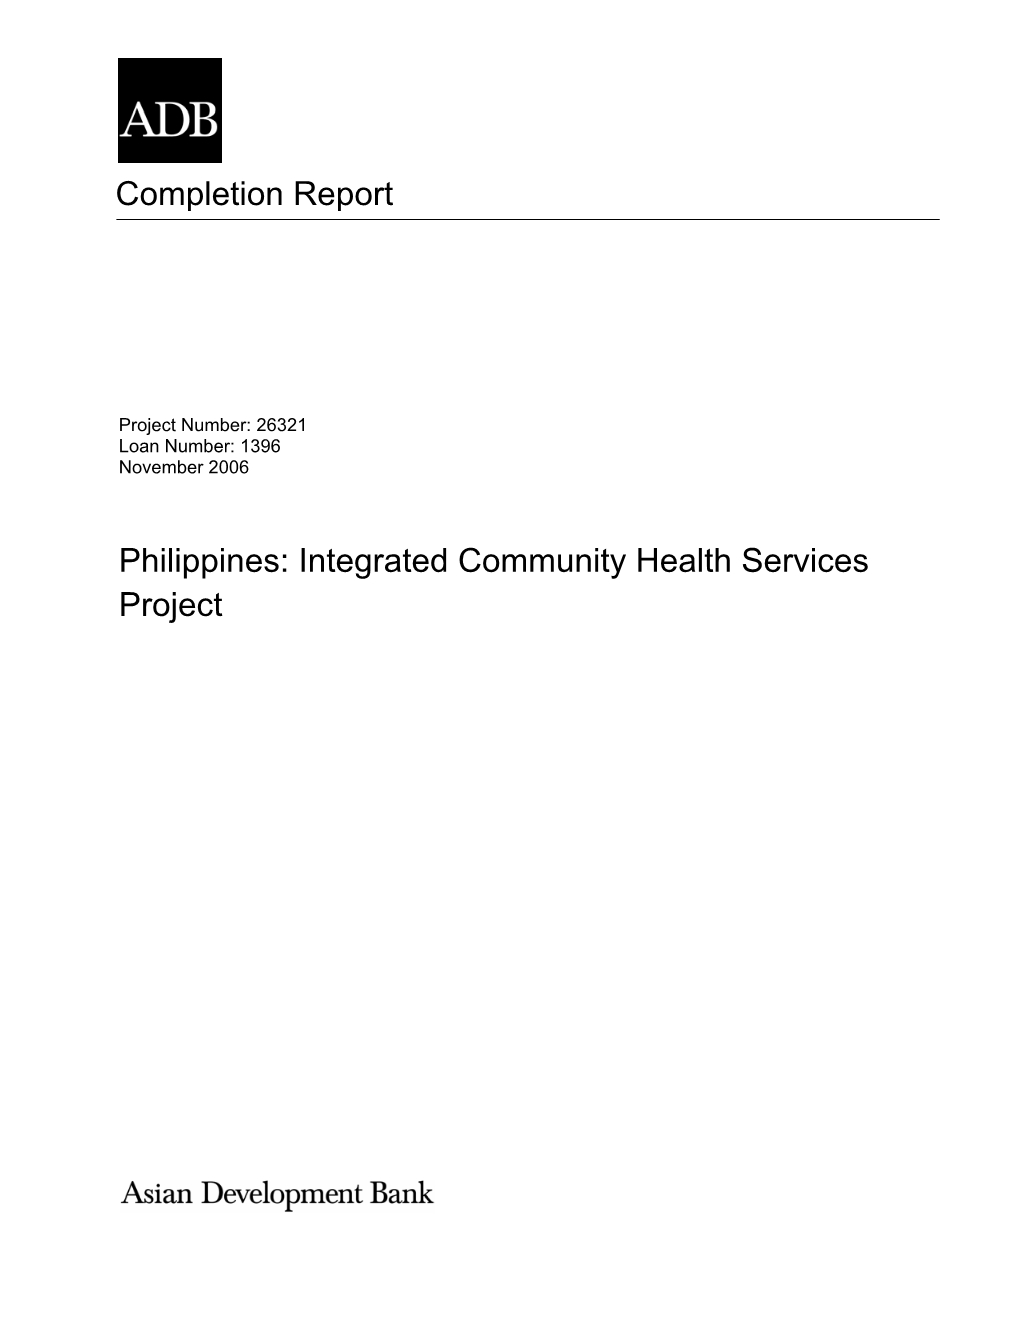 Integrated Community Health Services Project